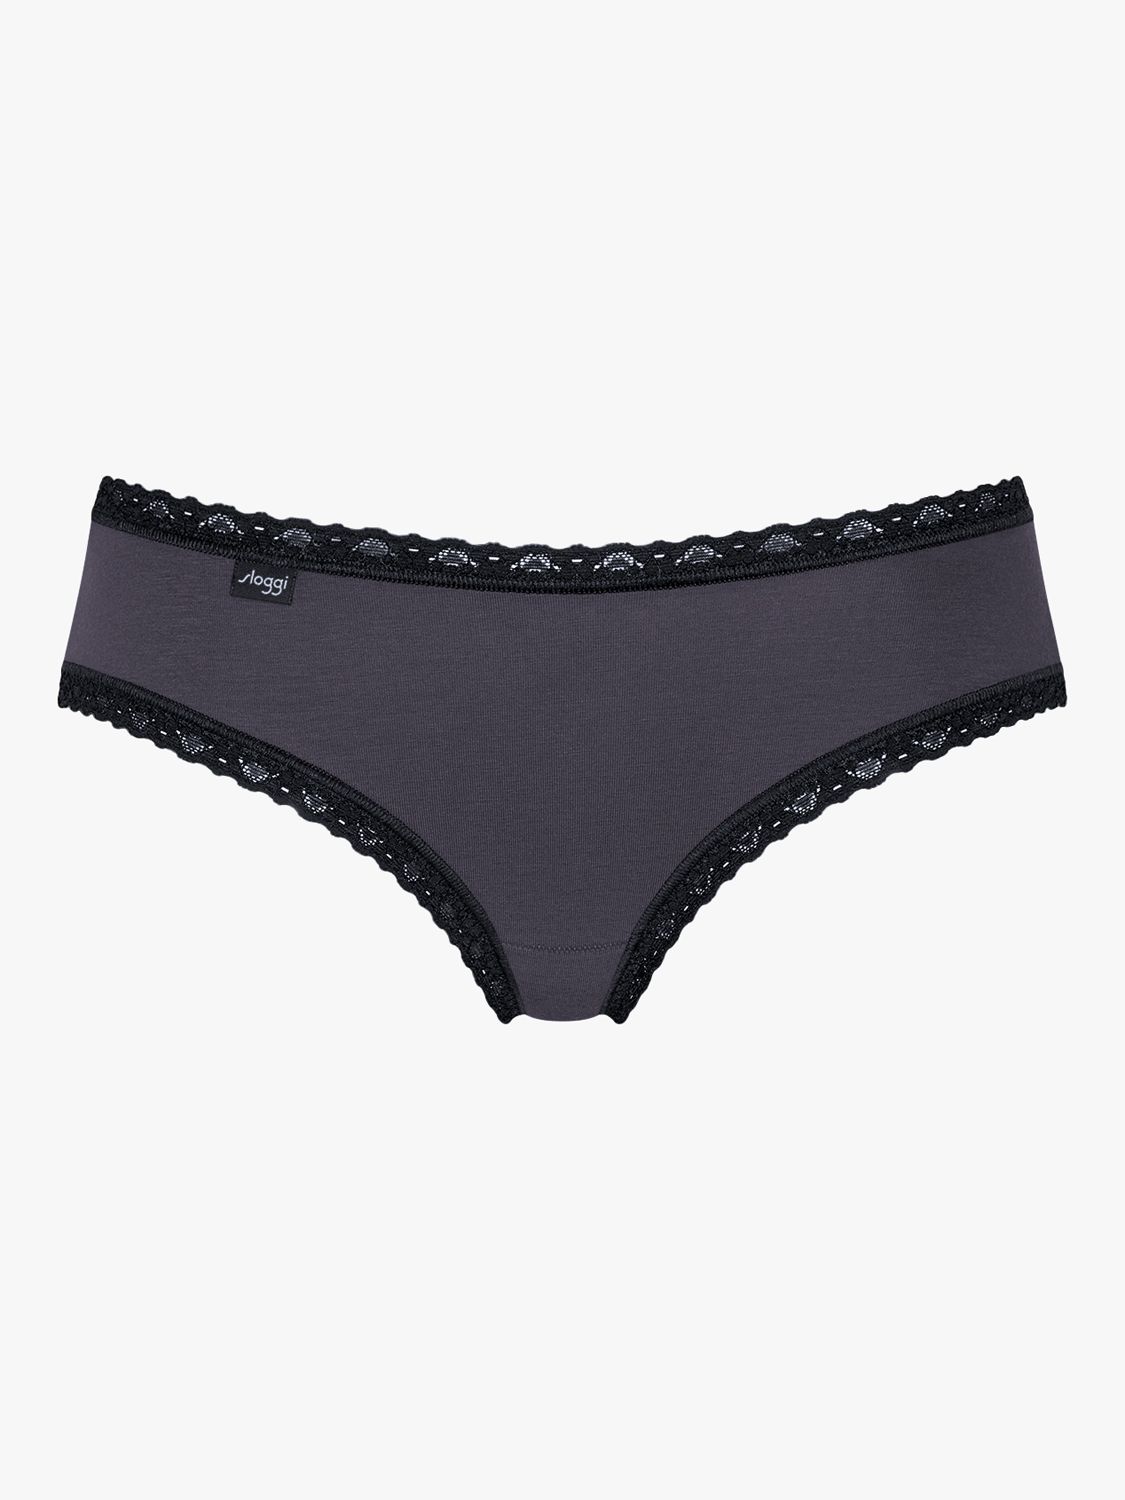 sloggi 24/7 Weekend Hipster Knickers, Pack of 3, Black Combination, 8